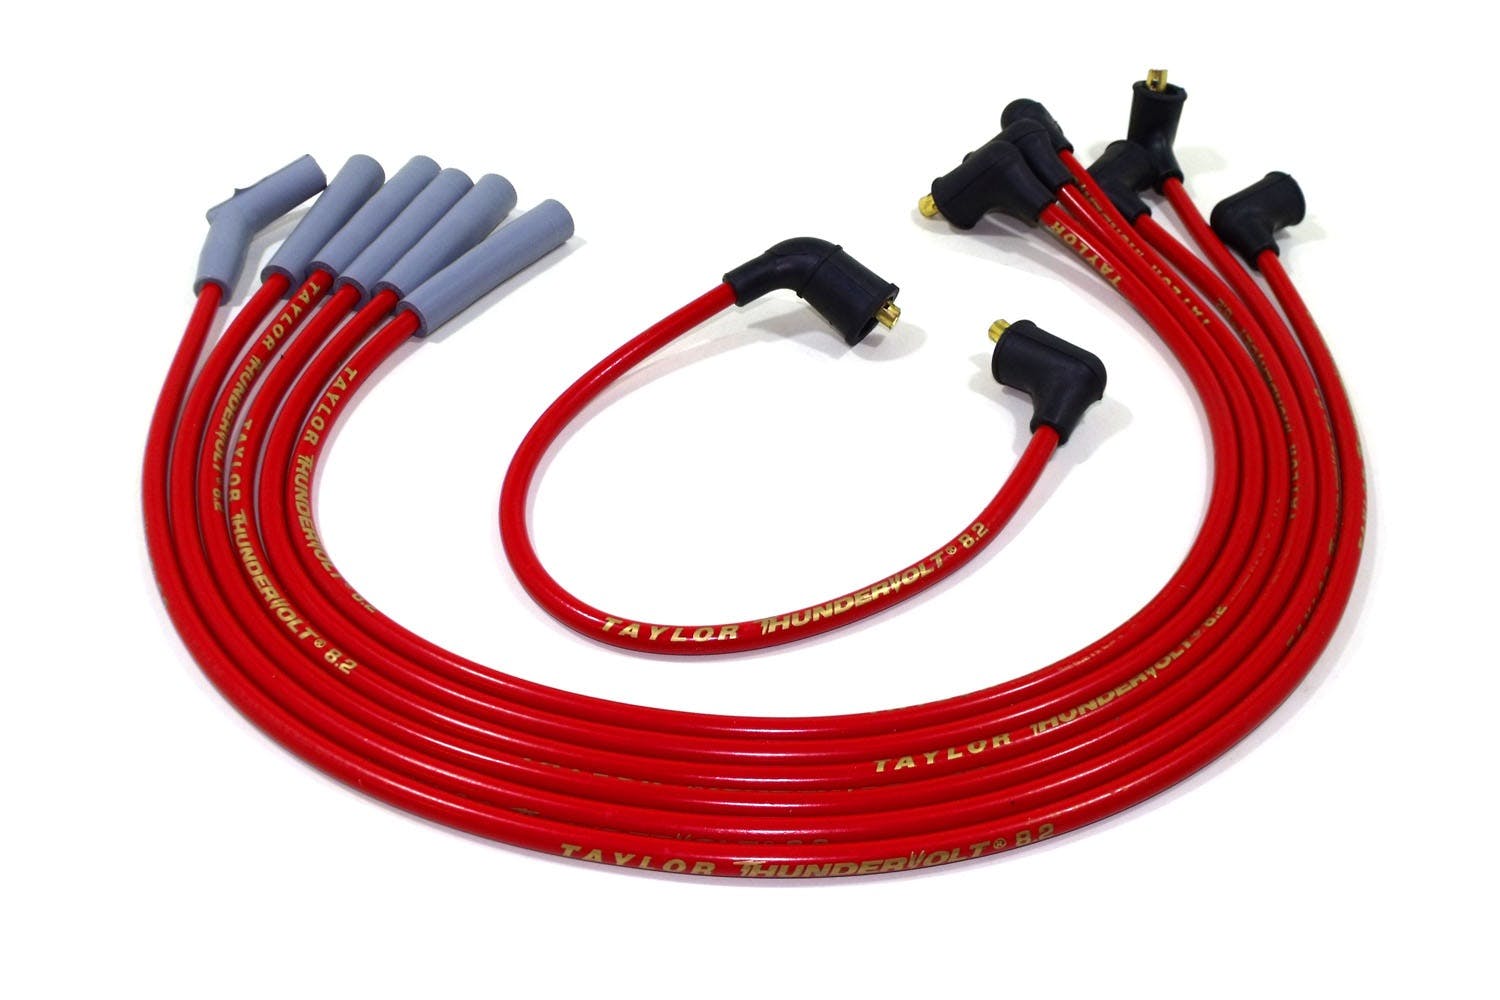 Taylor Cable Products 84290 Thundervolt 8.2 custom 6 cyl red